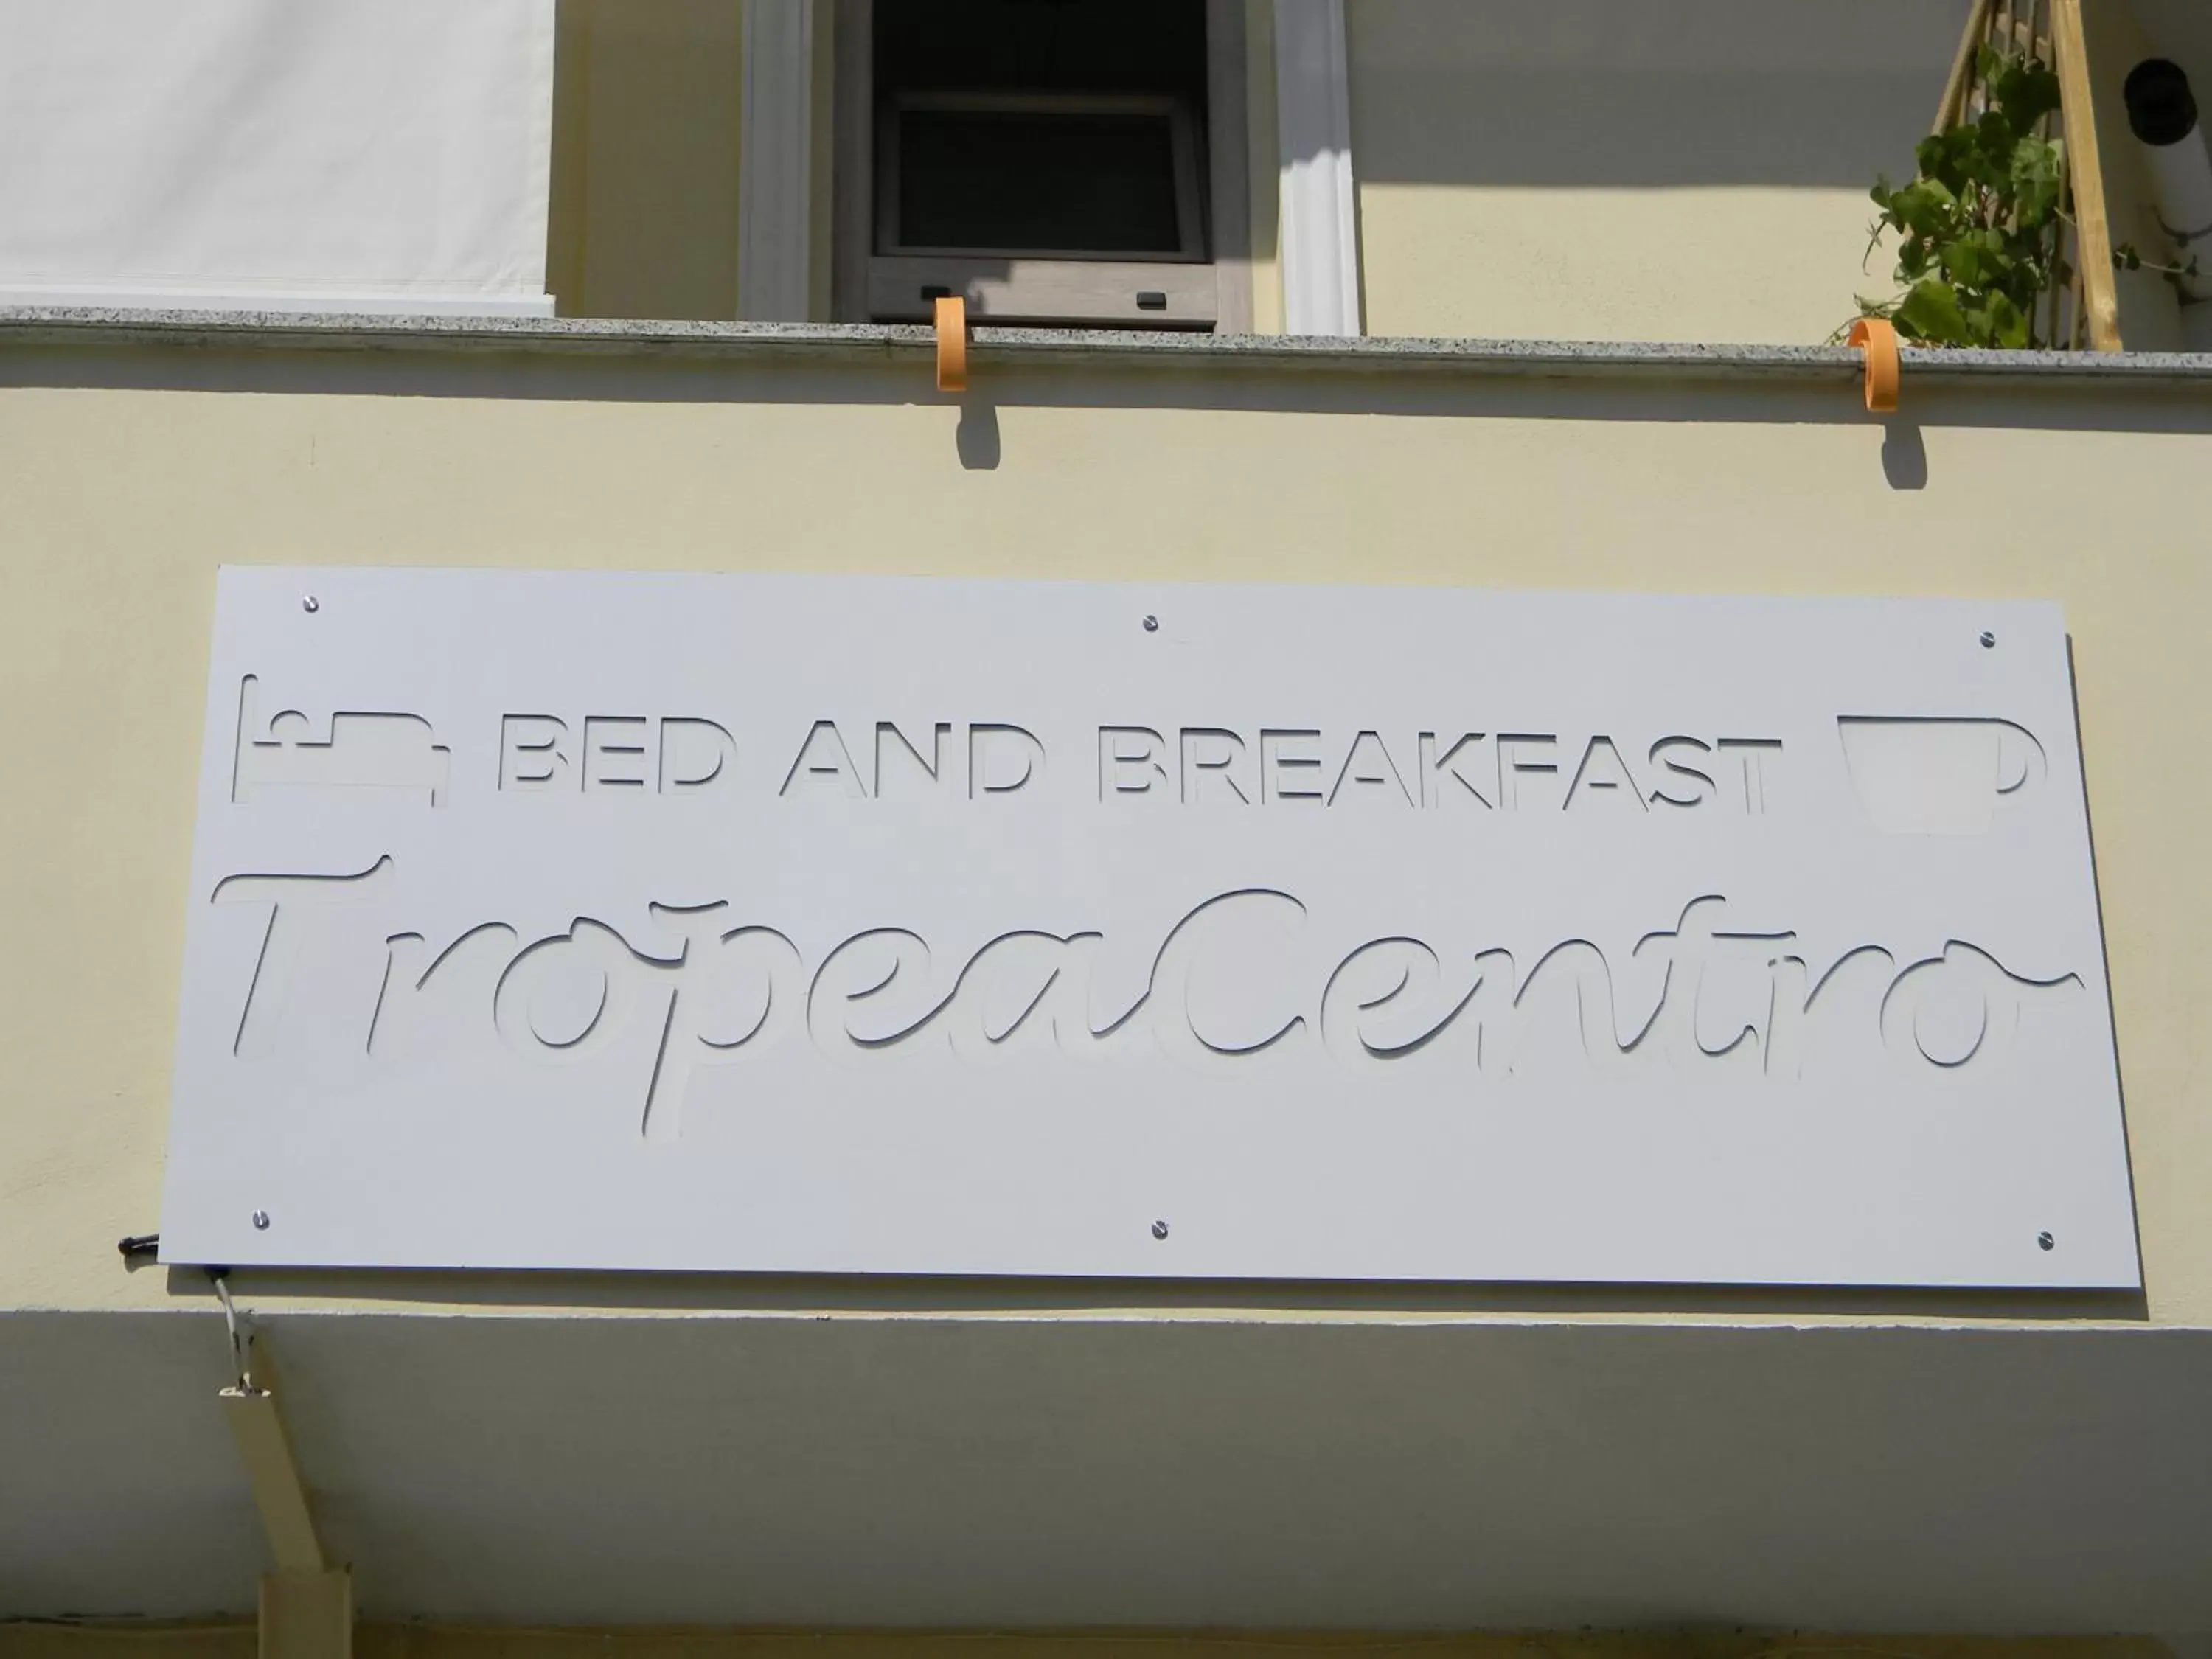 Property logo or sign in Tropeacentro